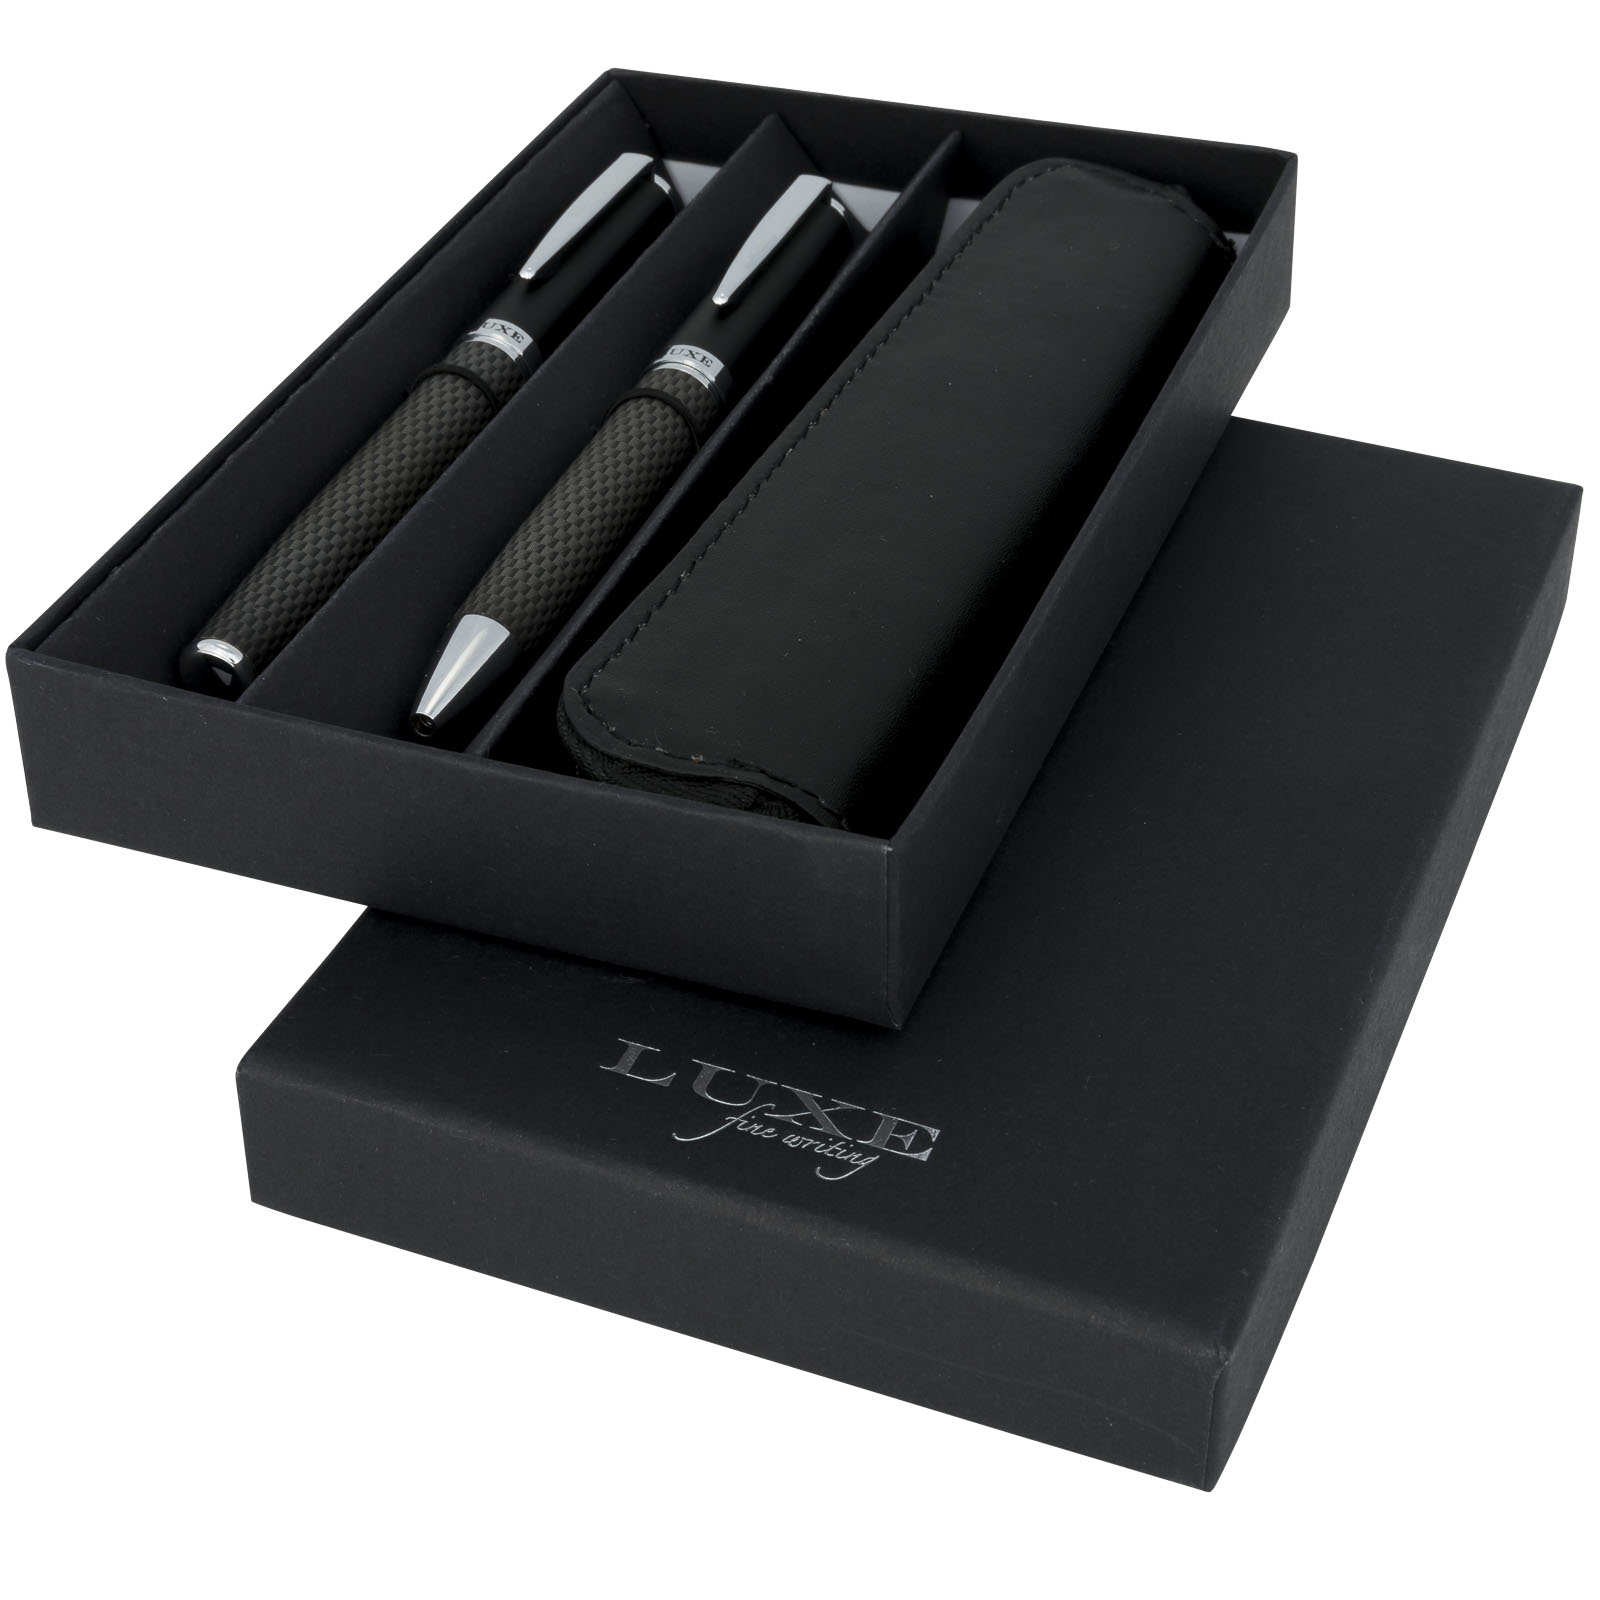 Advertising Gift sets - Carbon duo pen gift set with pouch - 0